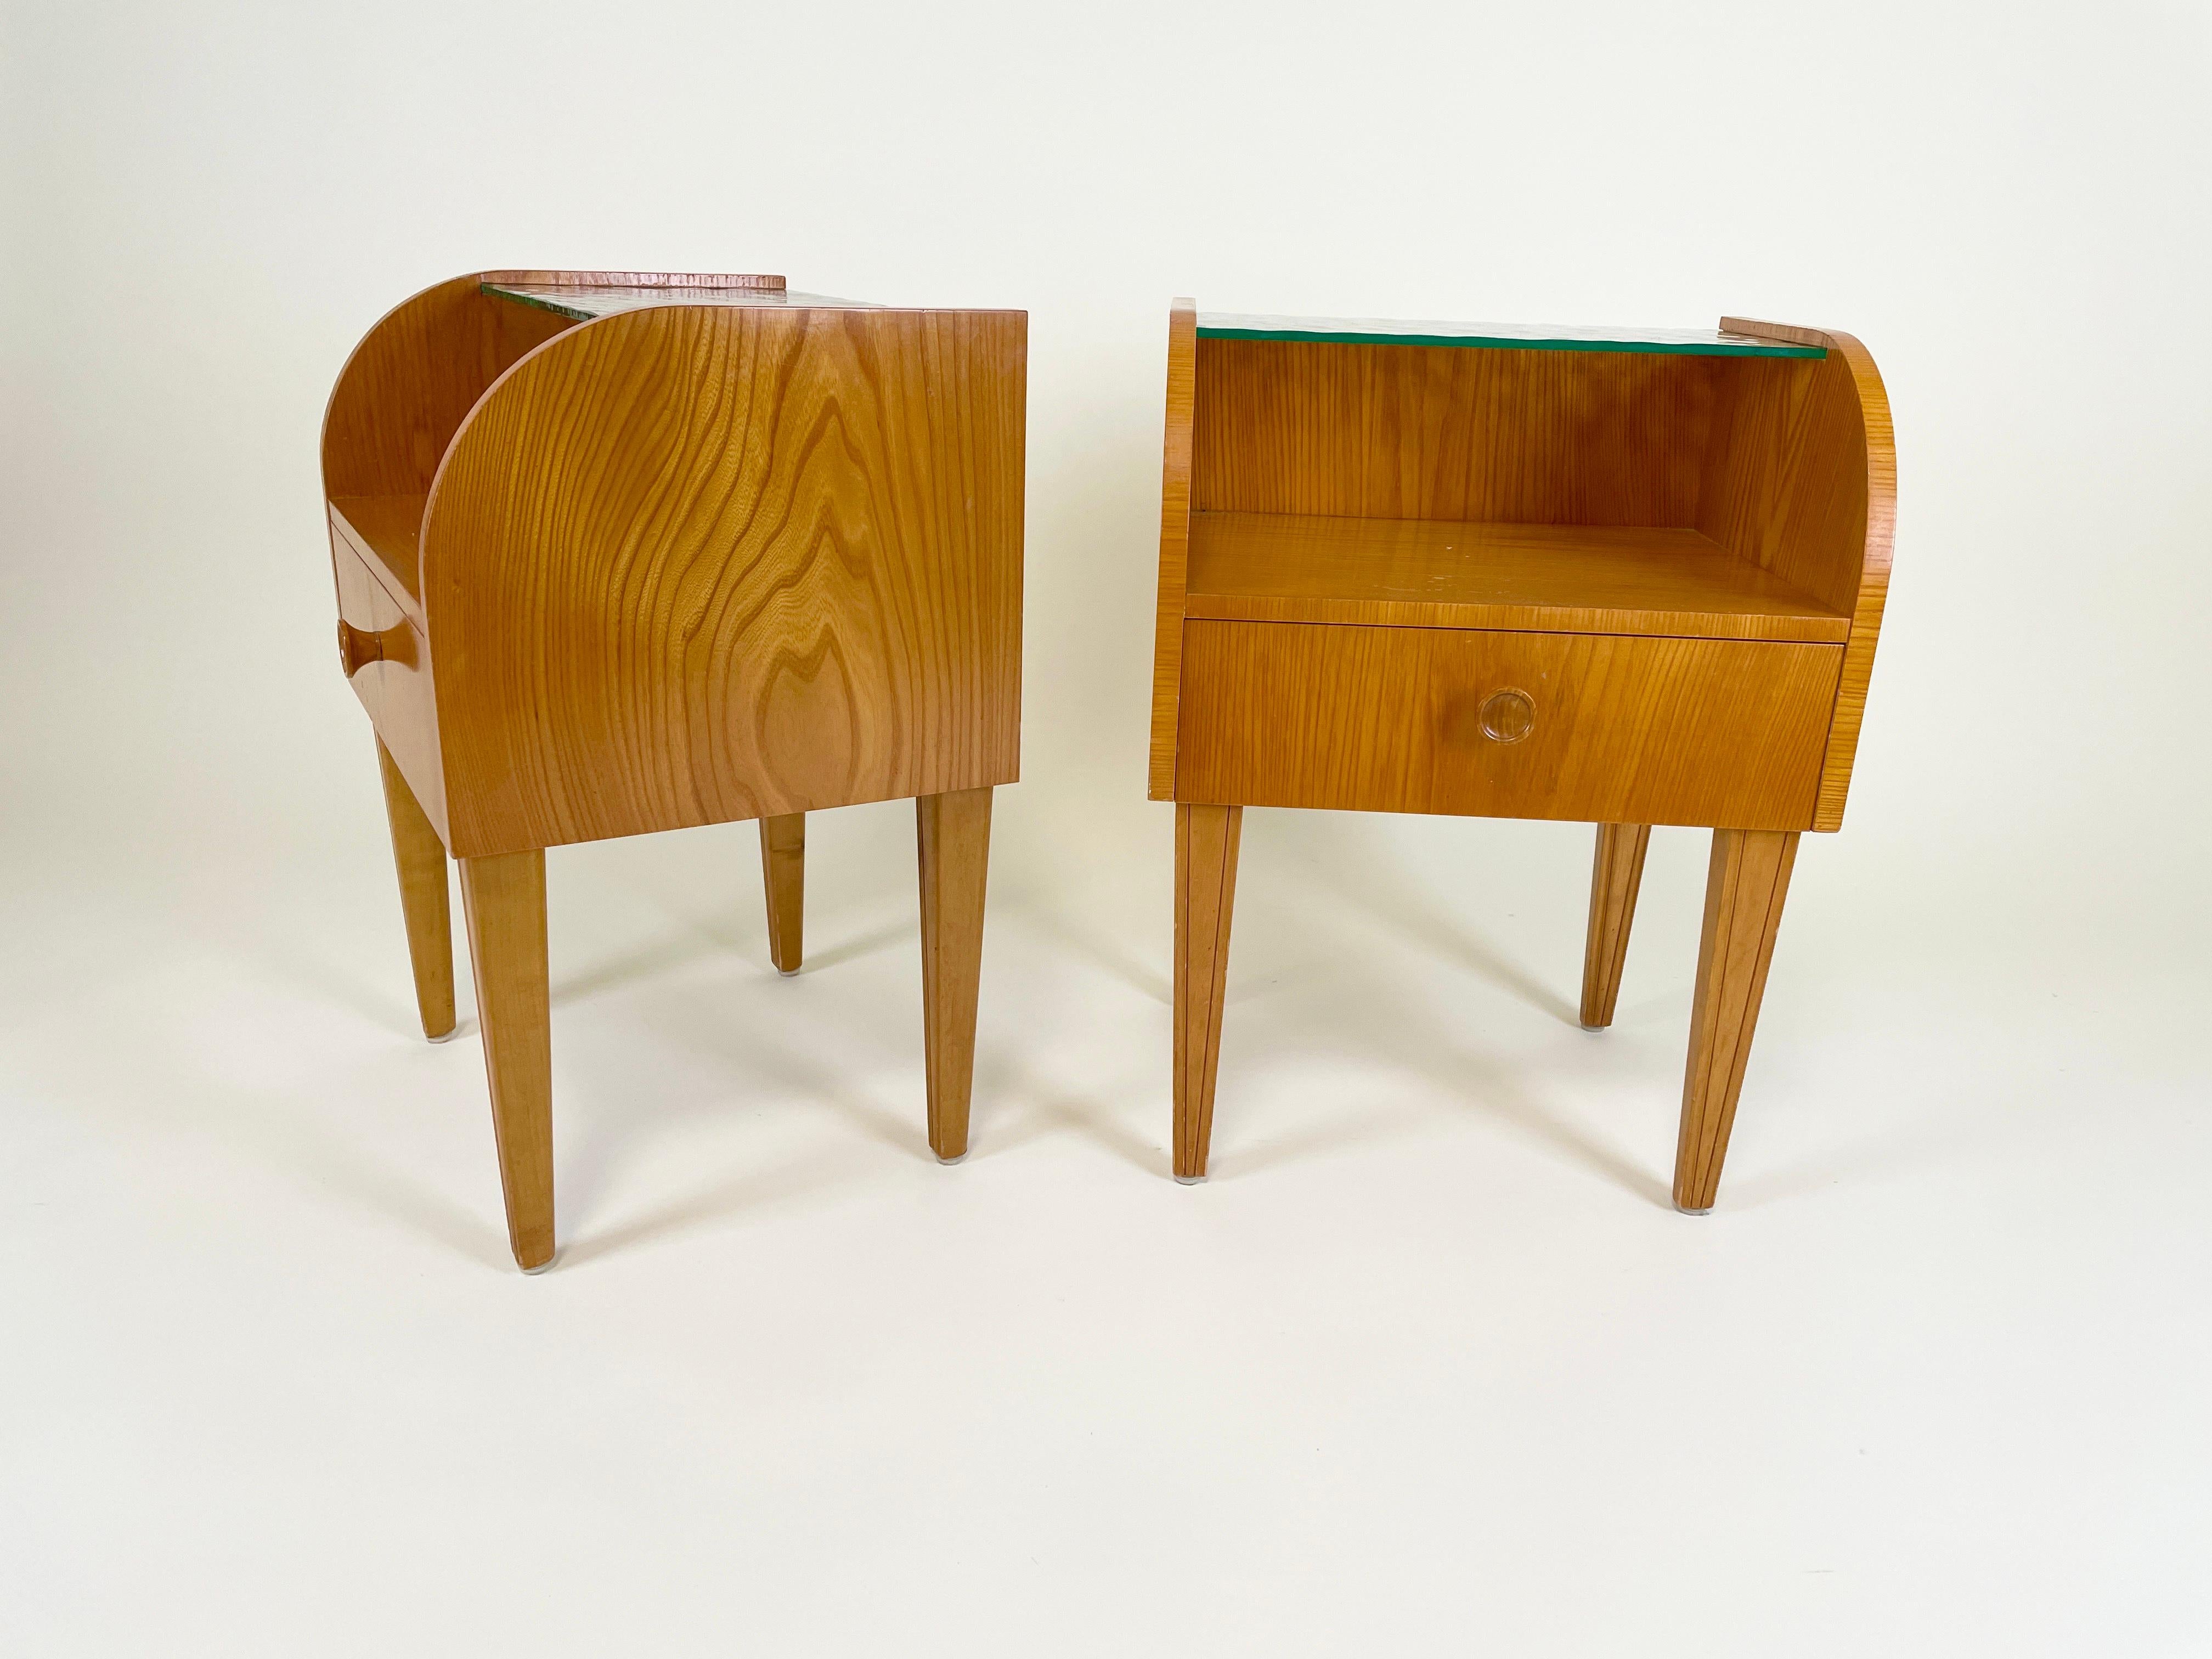 Bring elegance to your bedroom with this timeless pair of Finnish modern bedside tables, attributed to Margaret Travers Nordman in the 1930s and produced by Keravan Puusepäntehdas Oy/Stockmann. These bedside tables showcase seamless blend of